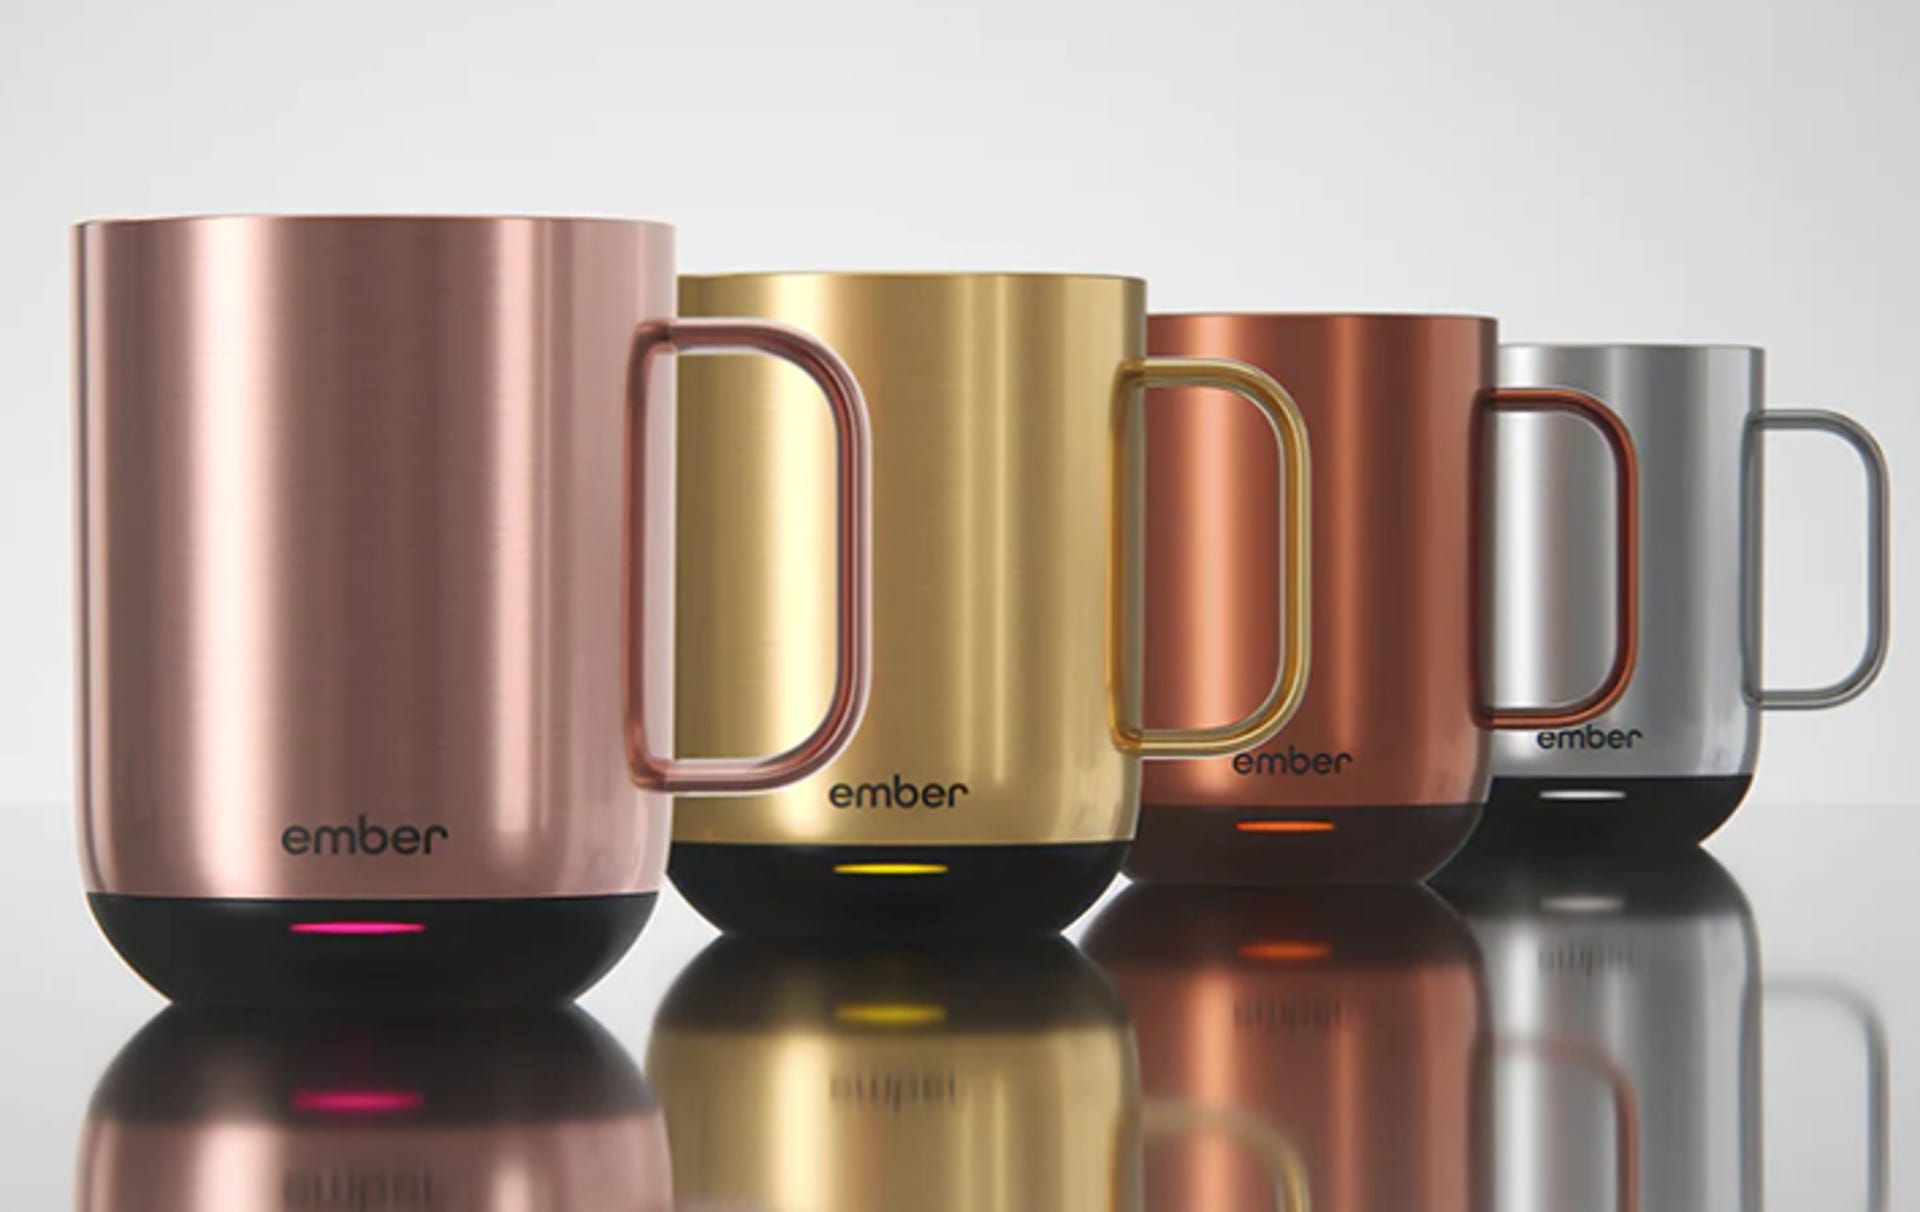 Get $30 Off Ember's Metallic-Colored 10-Ounce Smart Mug at